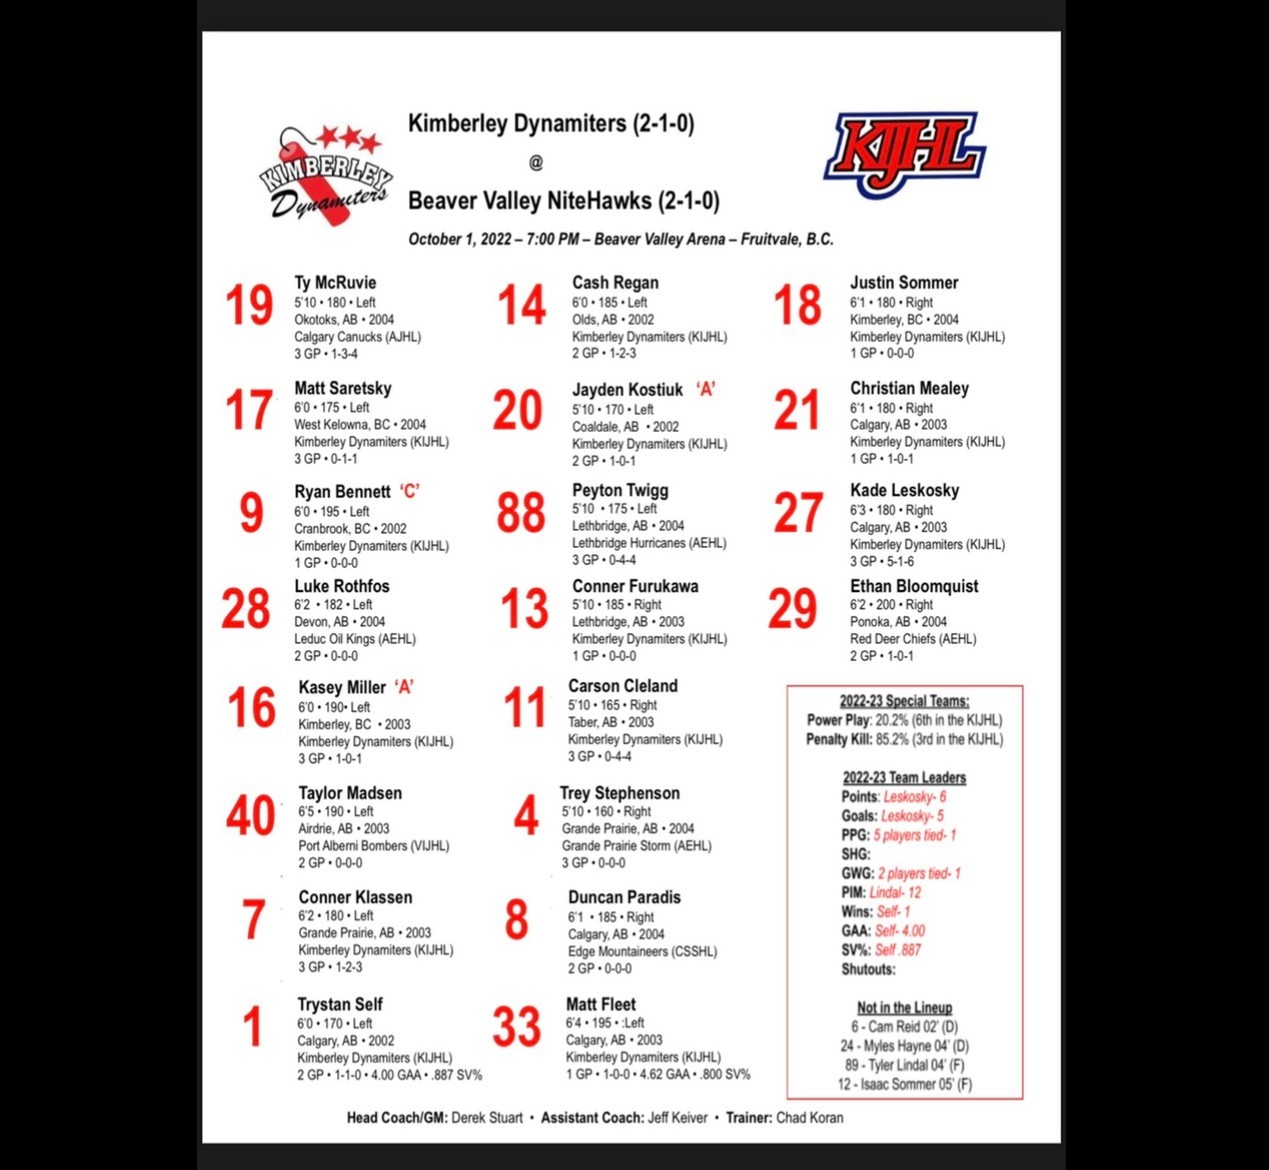 GAME DAY ROSTER
Here’s the Dynamiters line up for tonight’s game against Beaver Valley Nitehawks. 
Let’s Go Nitros!
🧨💥KABOOM!!!💥🧨 
#NitroNation #KIJHL